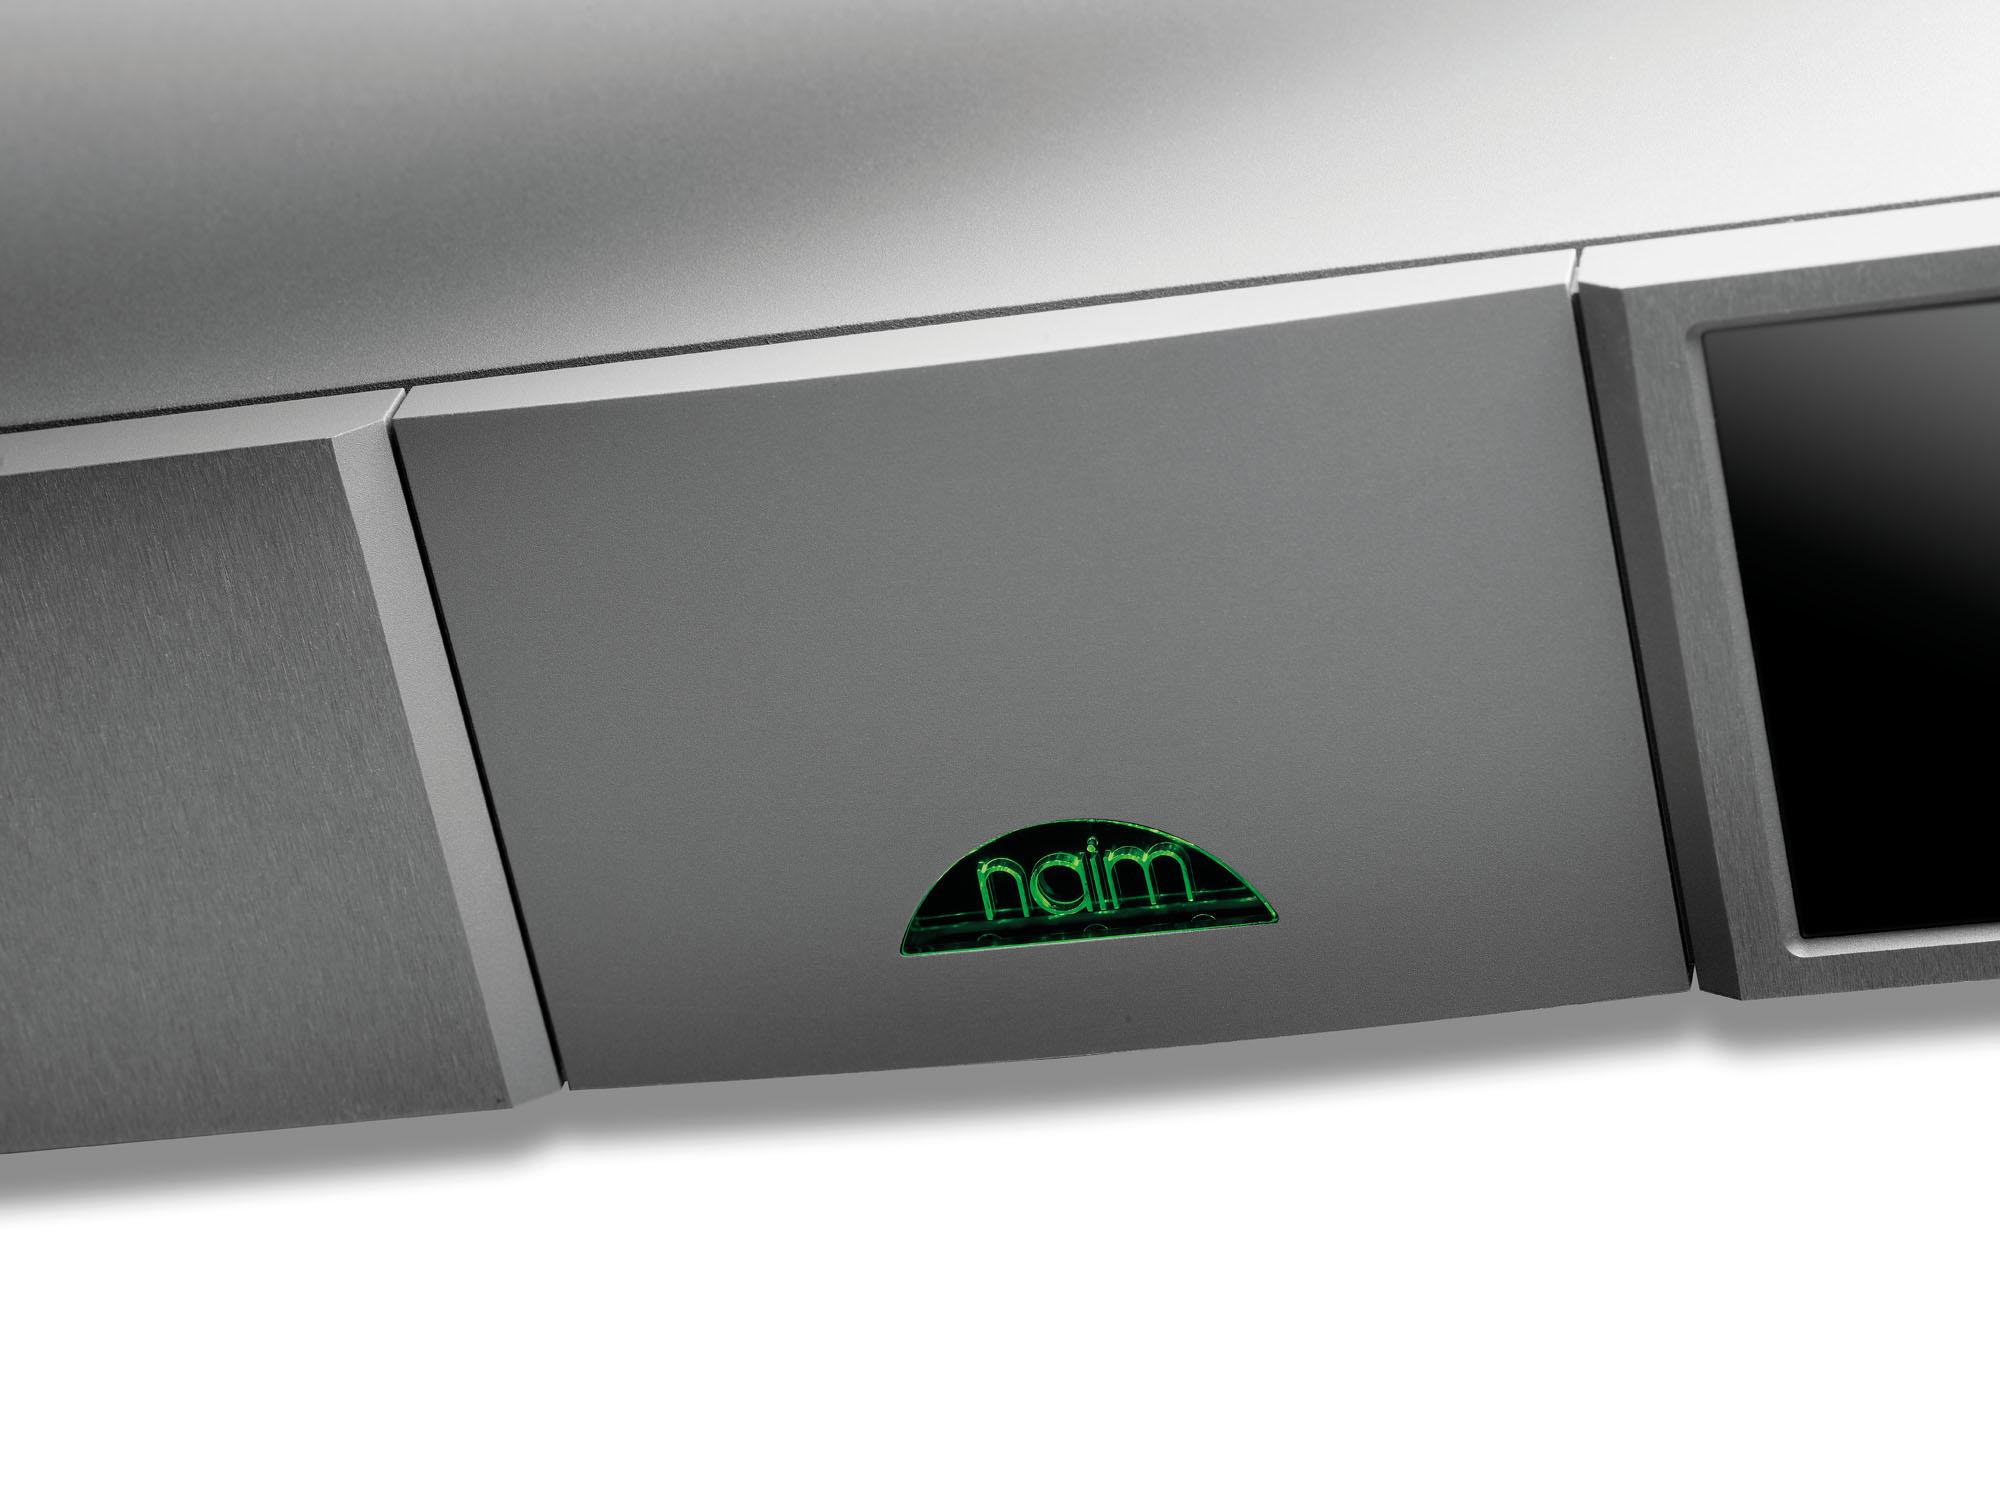 Marking ten years of Focal Naim collaboration with a system that celebrates synergy. d4a930e1 naim meuble zoom 01